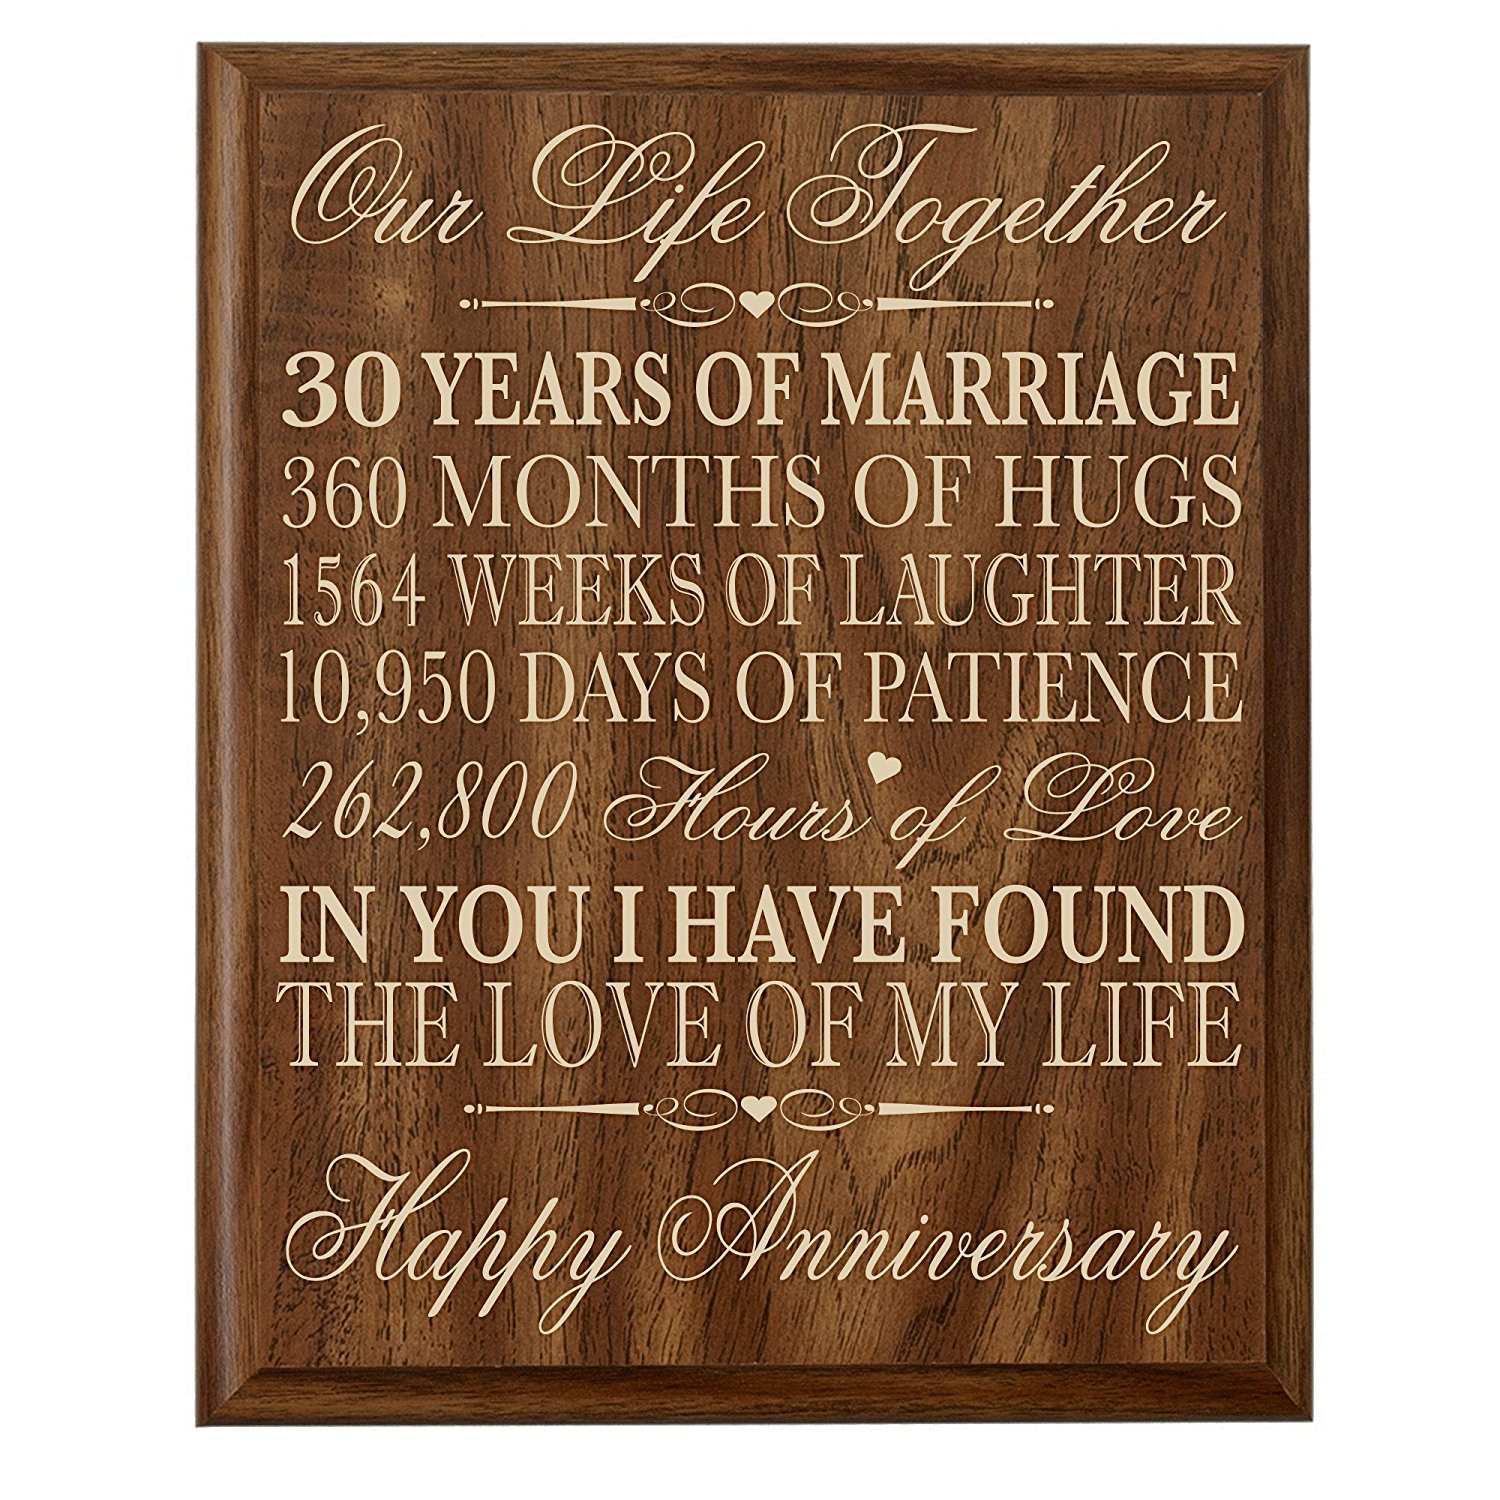 30 Years Wedding Anniversary Gift Ideas
 30th Anniversary Gift ideas Couple Parents 30 year